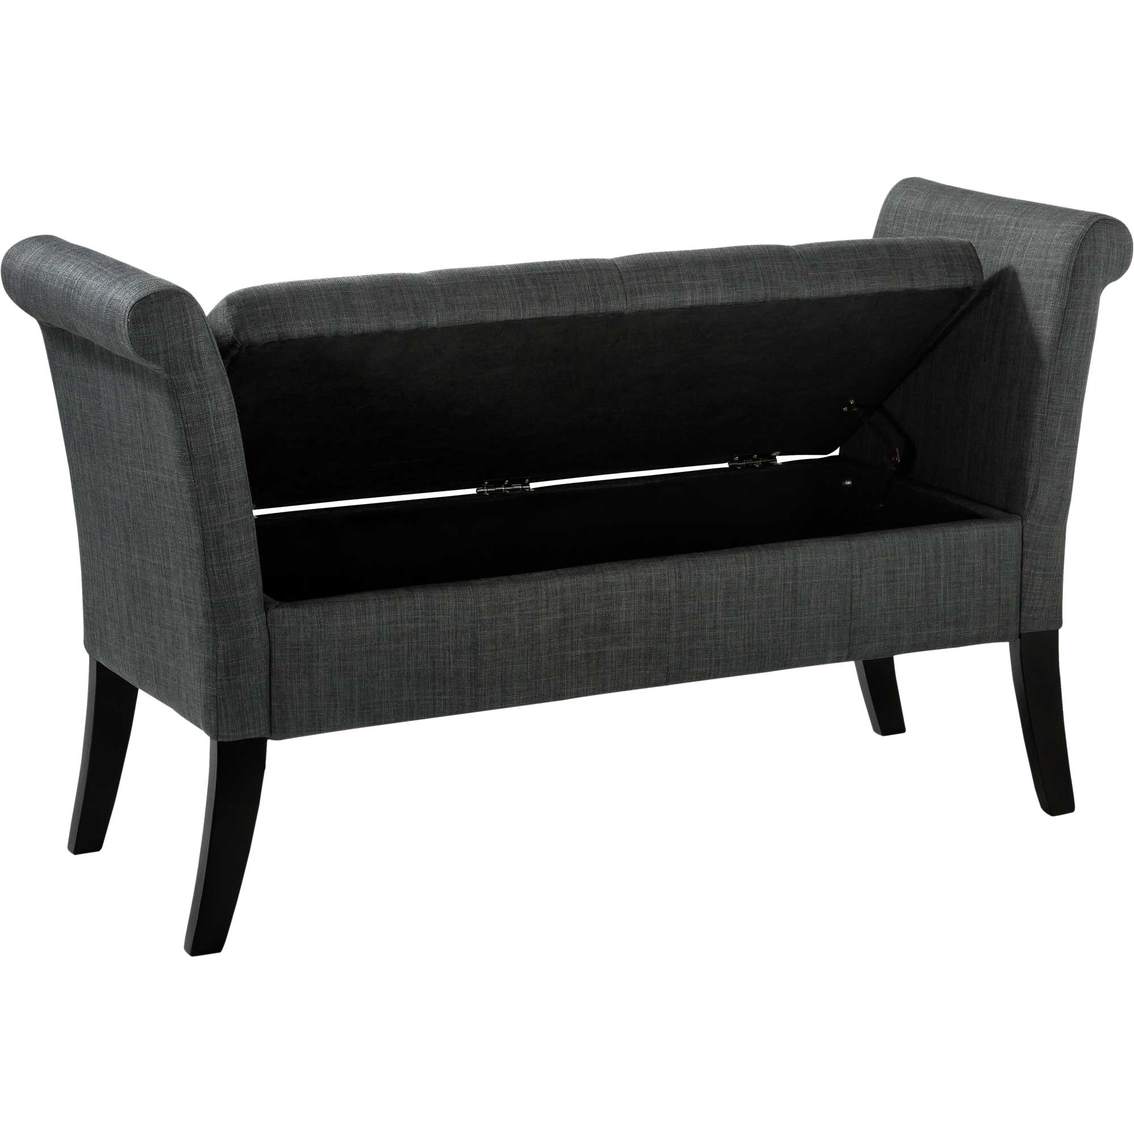 CorLiving LAD-501-O Antonio Scrolled Fabric Storage Bench - Image 3 of 6